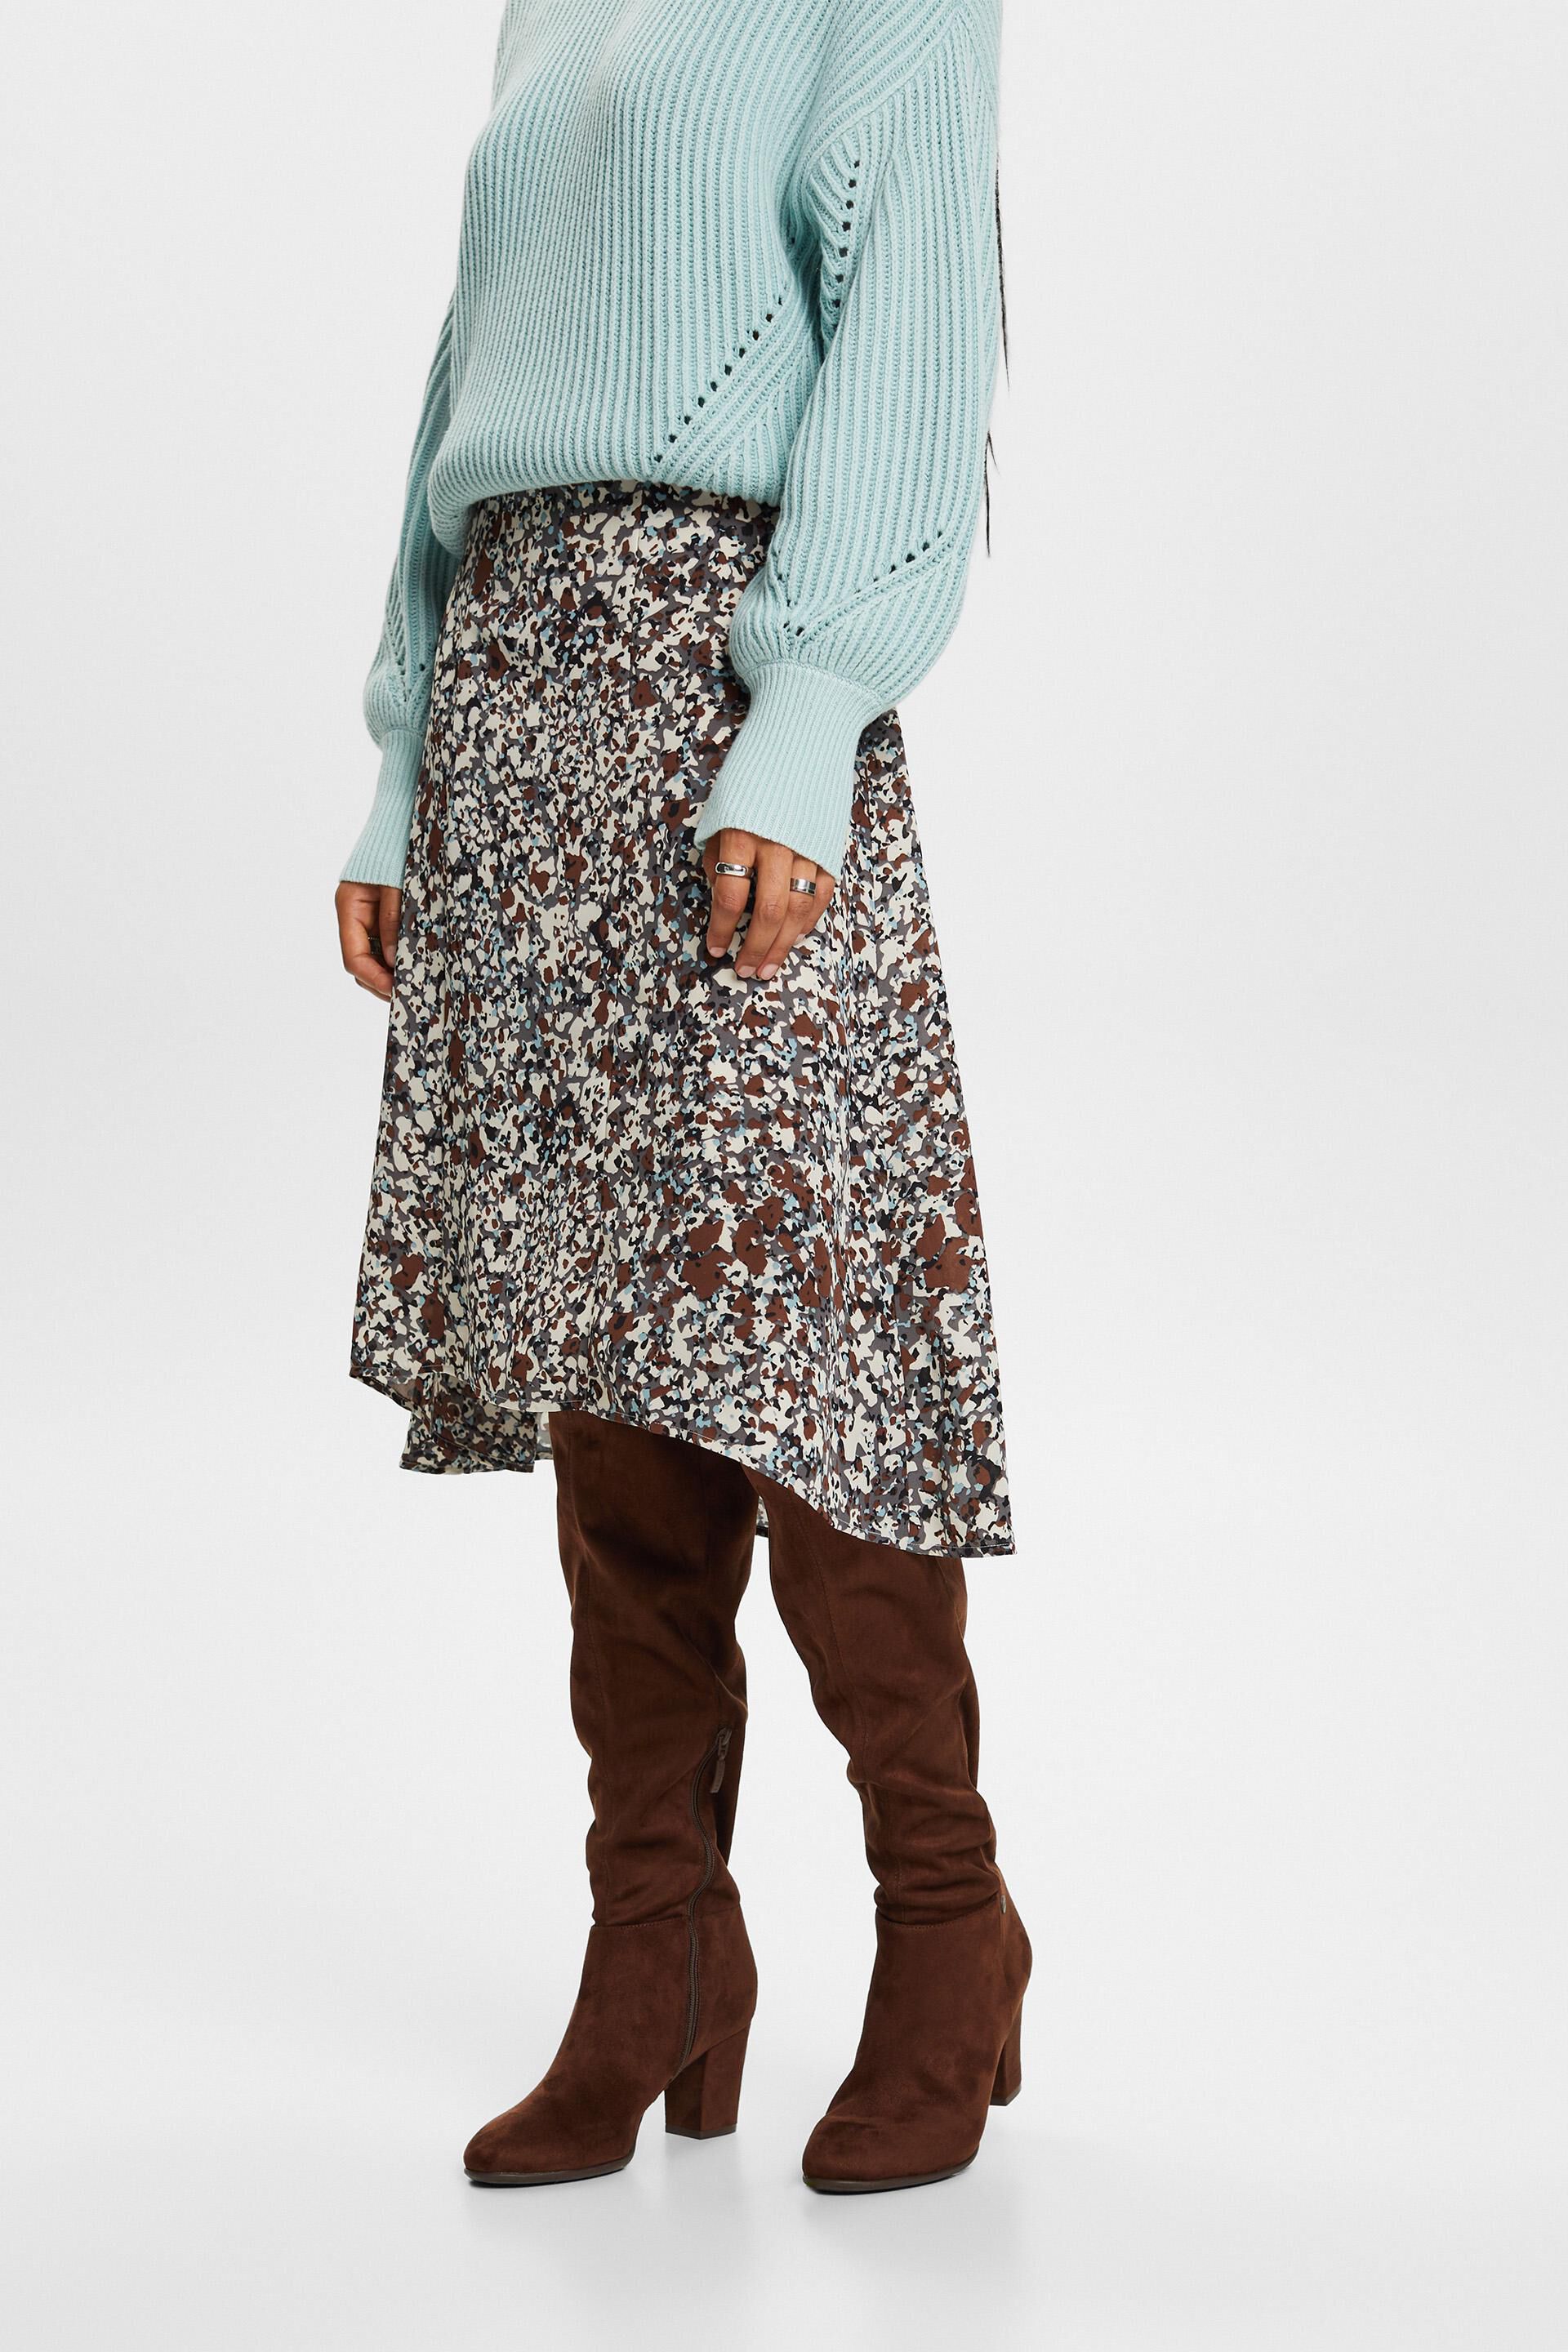 Esprit skirt midi patterned Recycled: